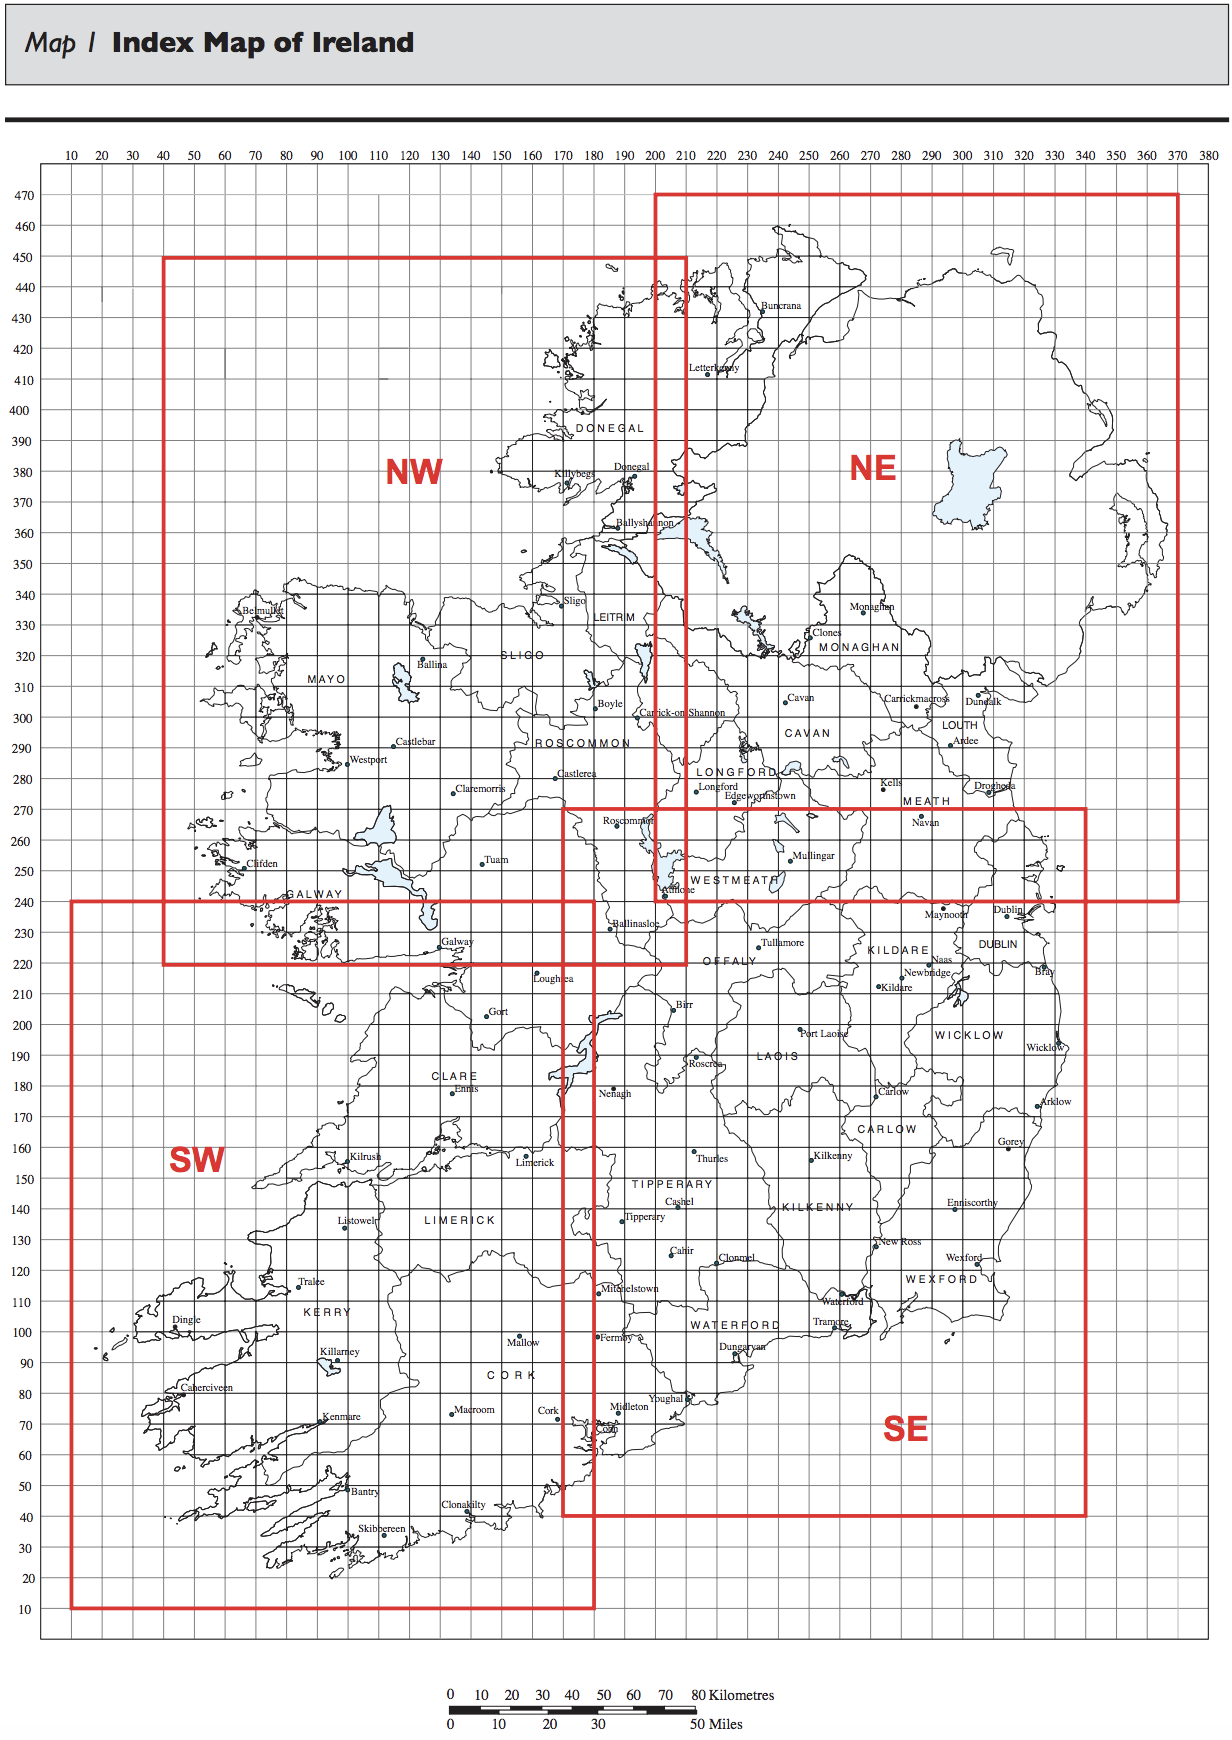 Diagram HC3 - Index map of Ireland - Extract from TGD C